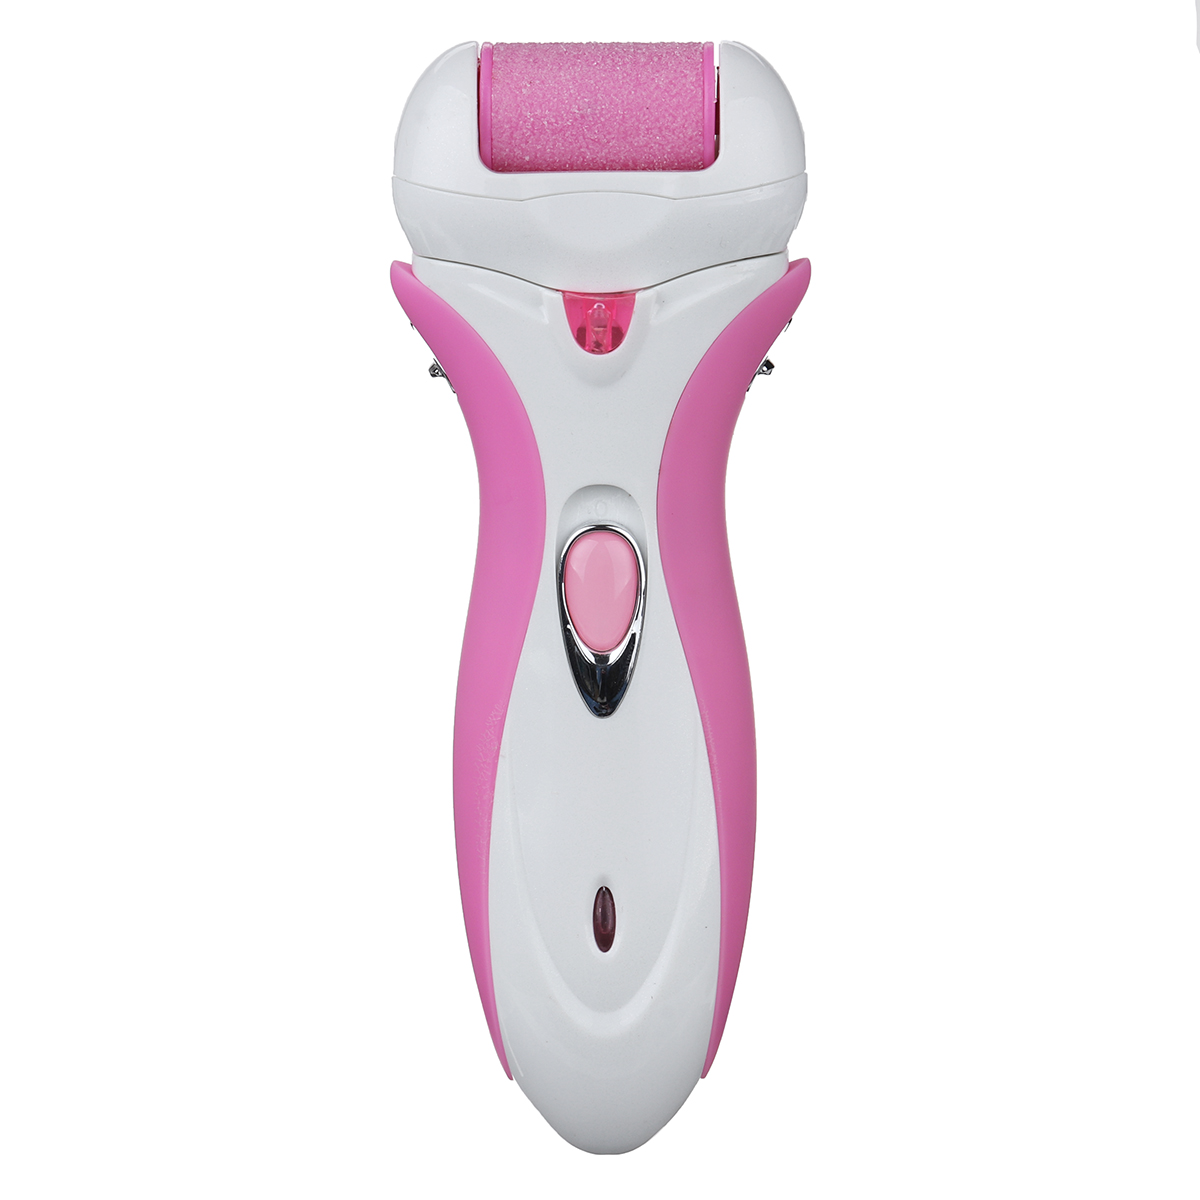 4-in-1-Electric-Foot-Grinder-Remover-Dead-Skin-Ladys-Hair-Removal-Painless-Shaver-Epilator-Exfoliat-1290631